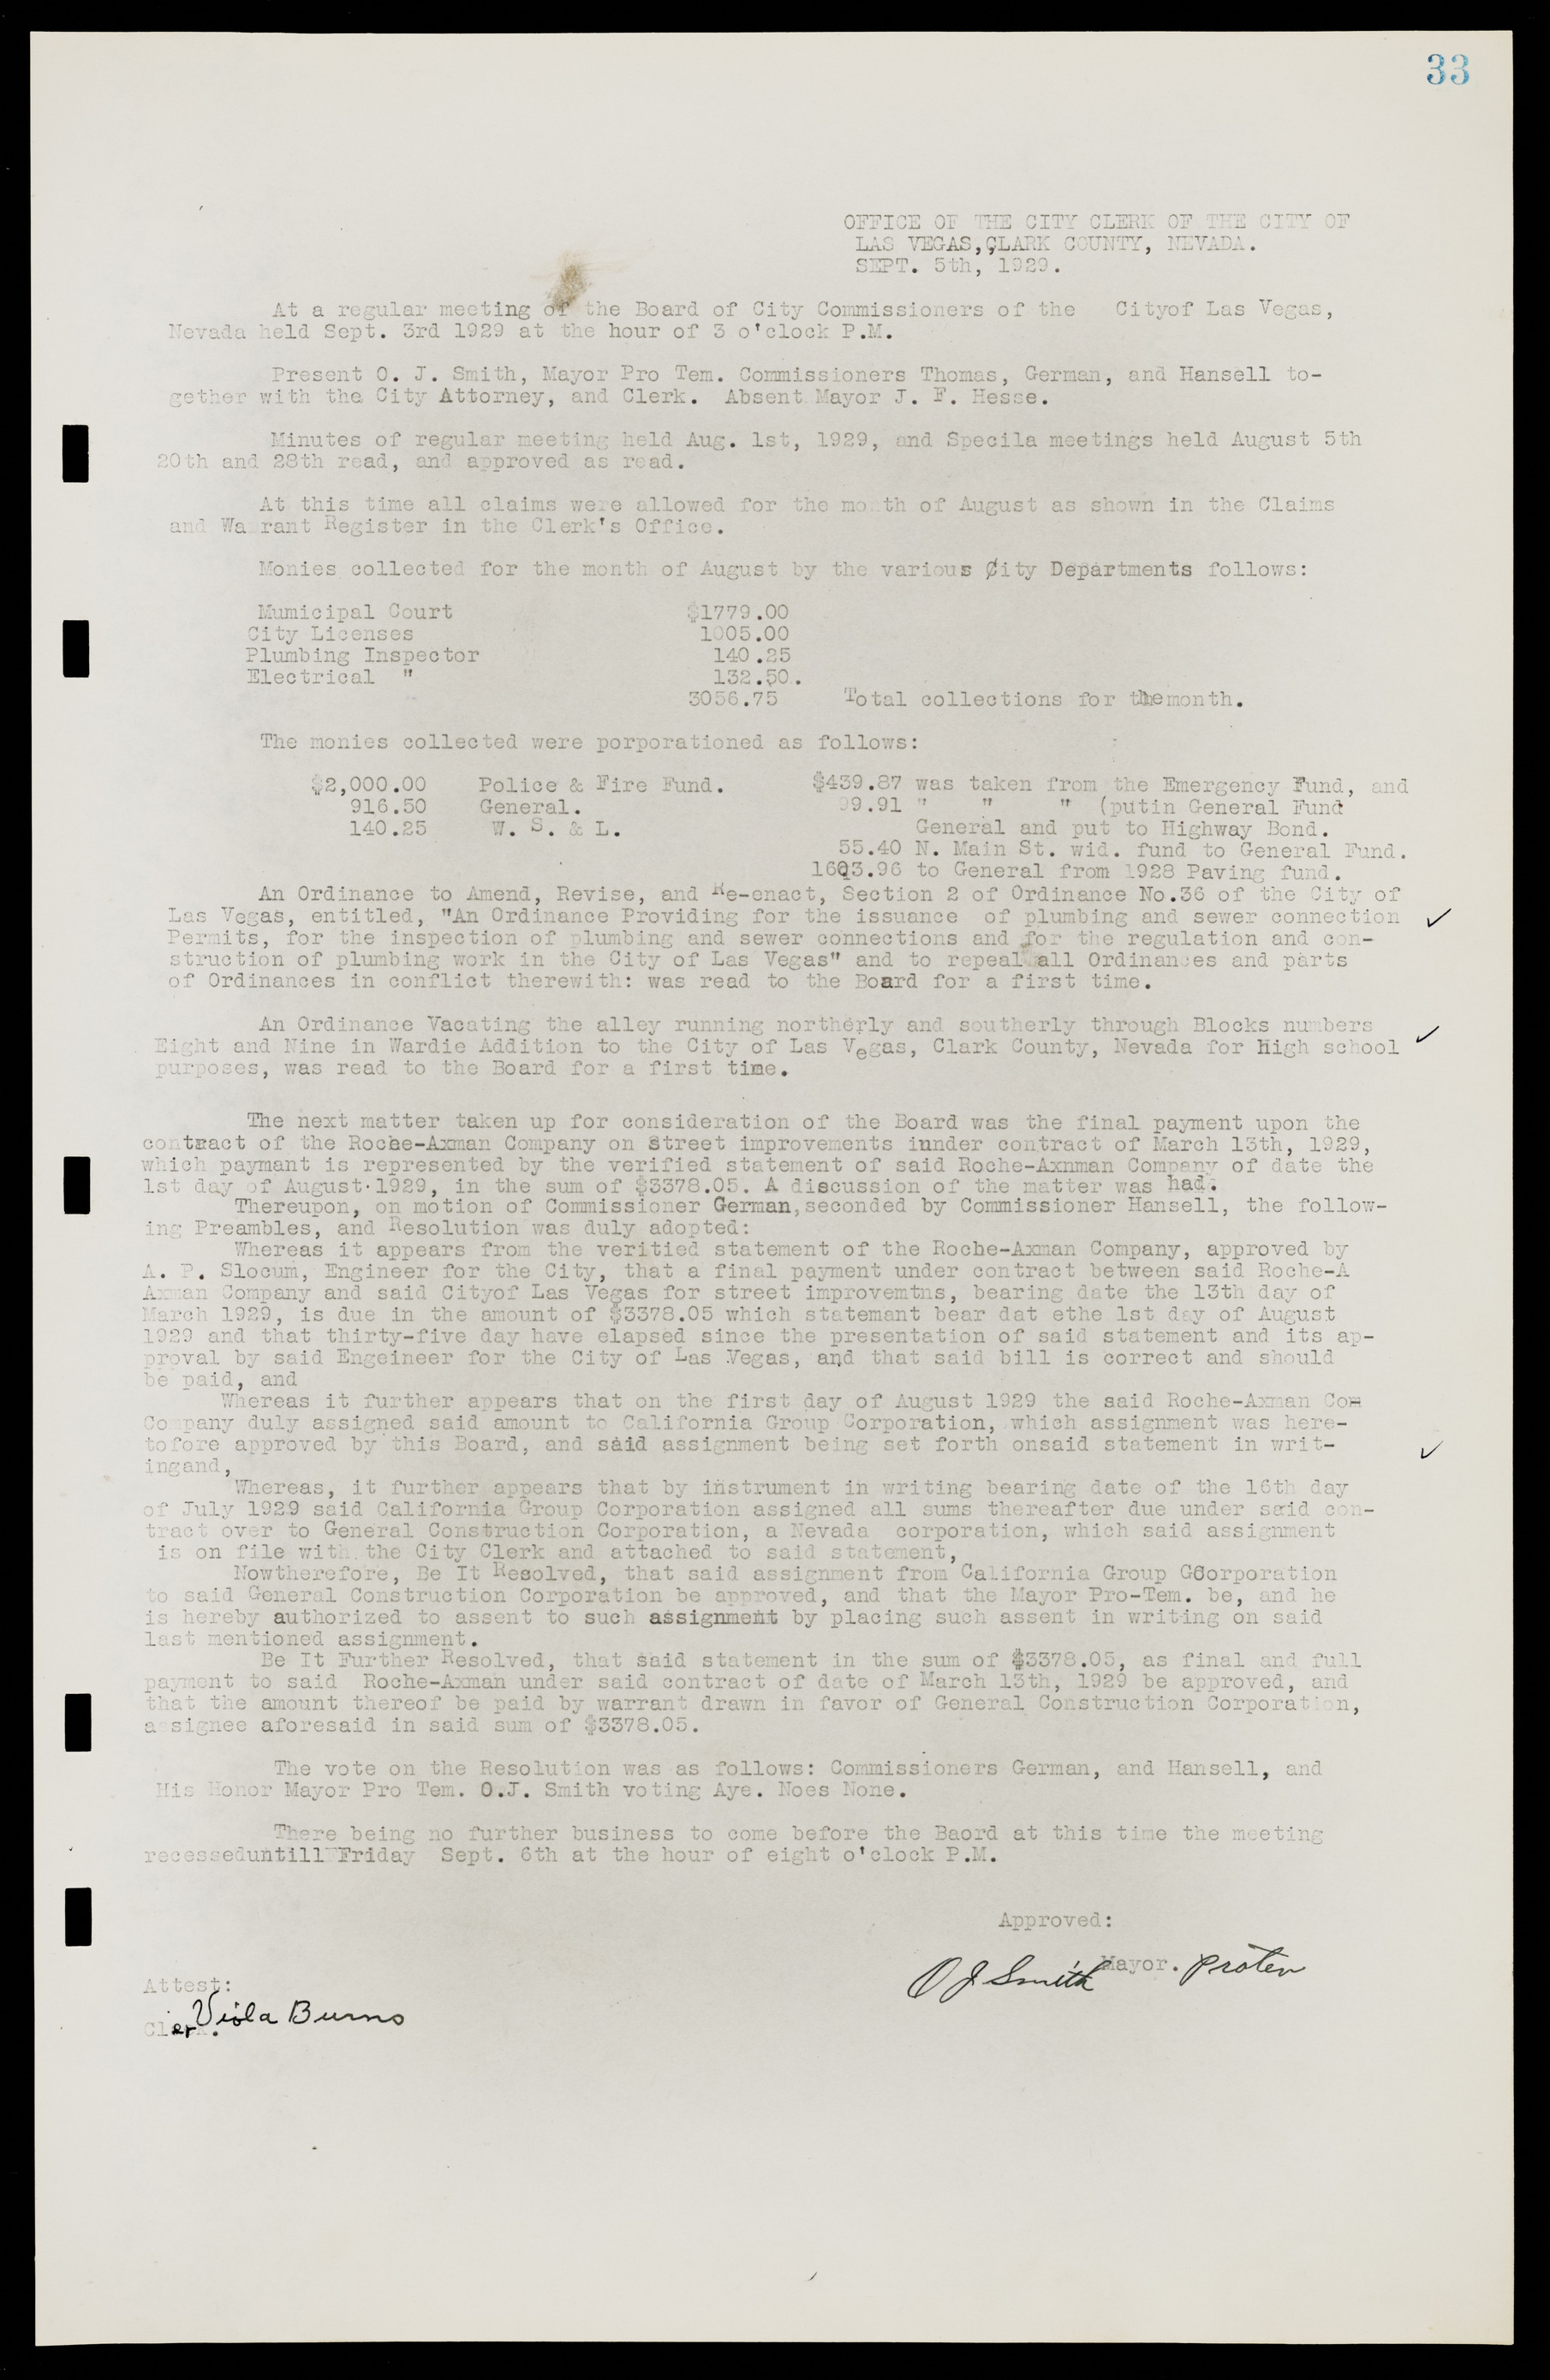 Las Vegas City Commission Minutes, May 14, 1929 to February 11, 1937, lvc000003-39